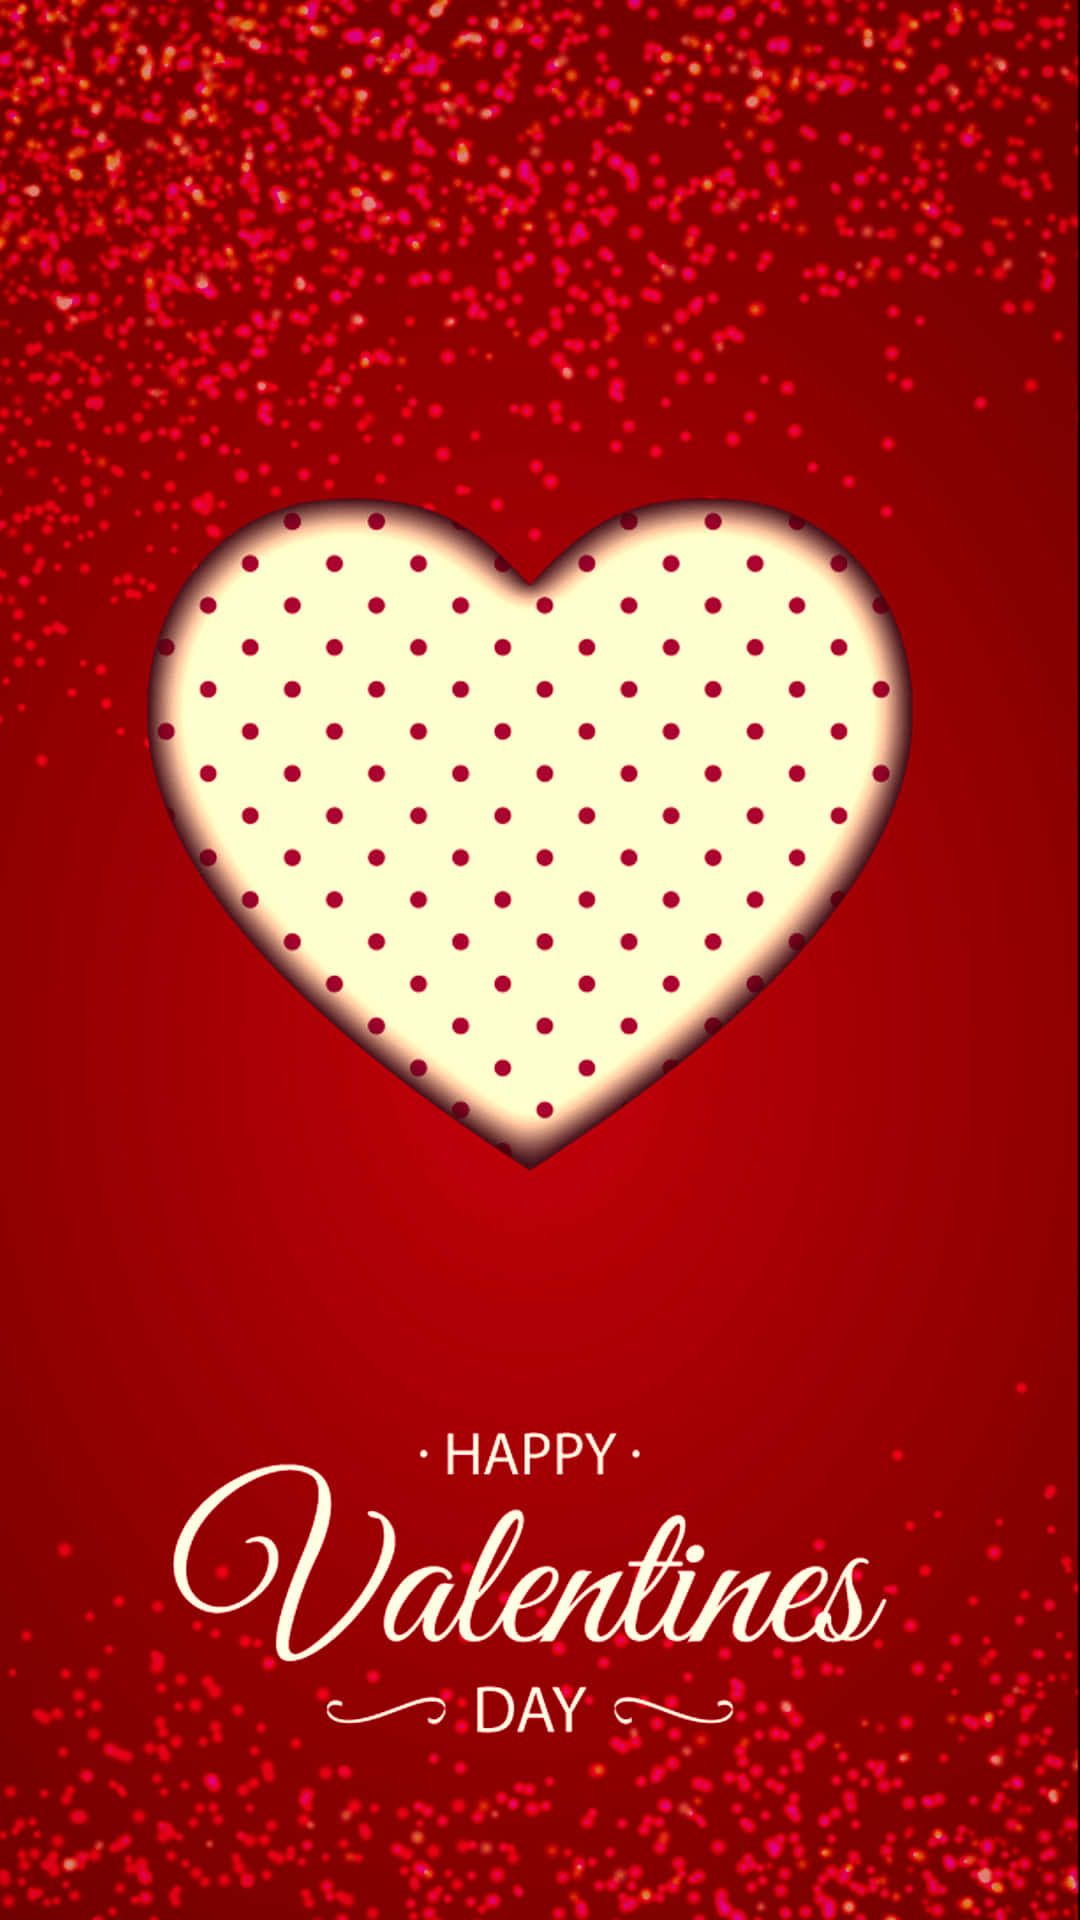 Happy Valentine's Day Background With Heart Wallpaper